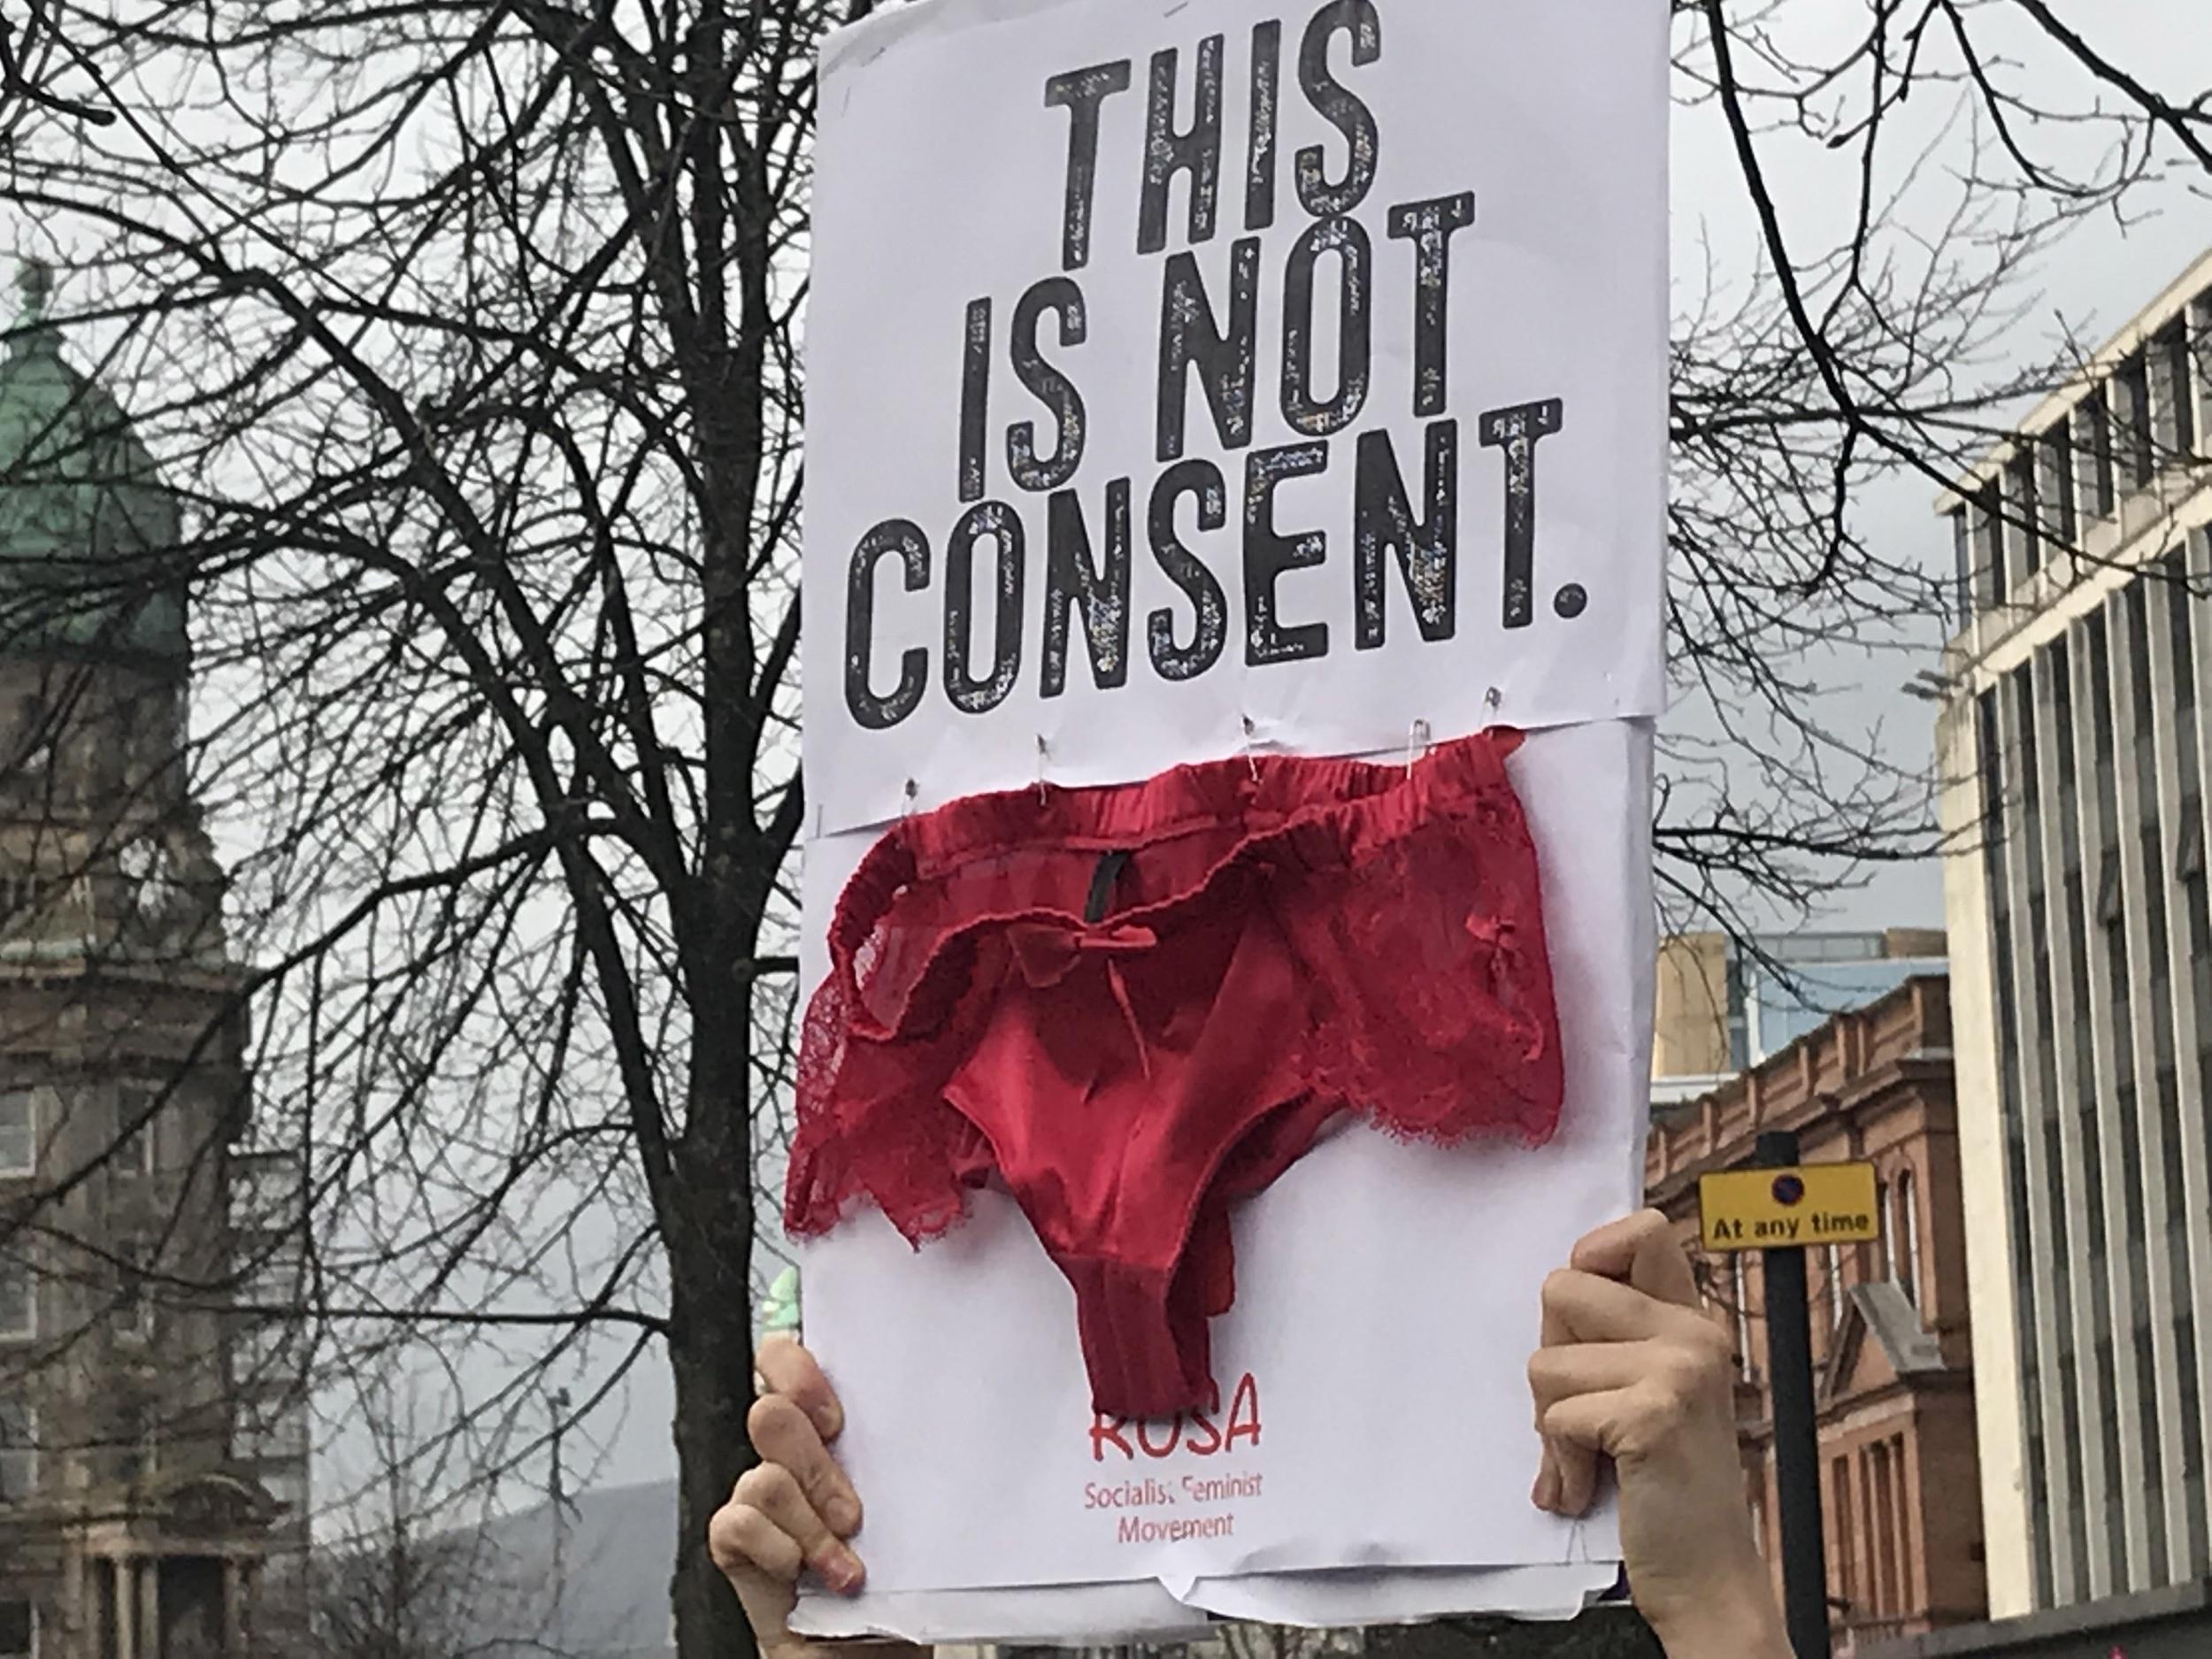 A protester at Belfast City Hall holds up underwear on a banner during a demonstration to highlight concerns over how rape trials are conducted.